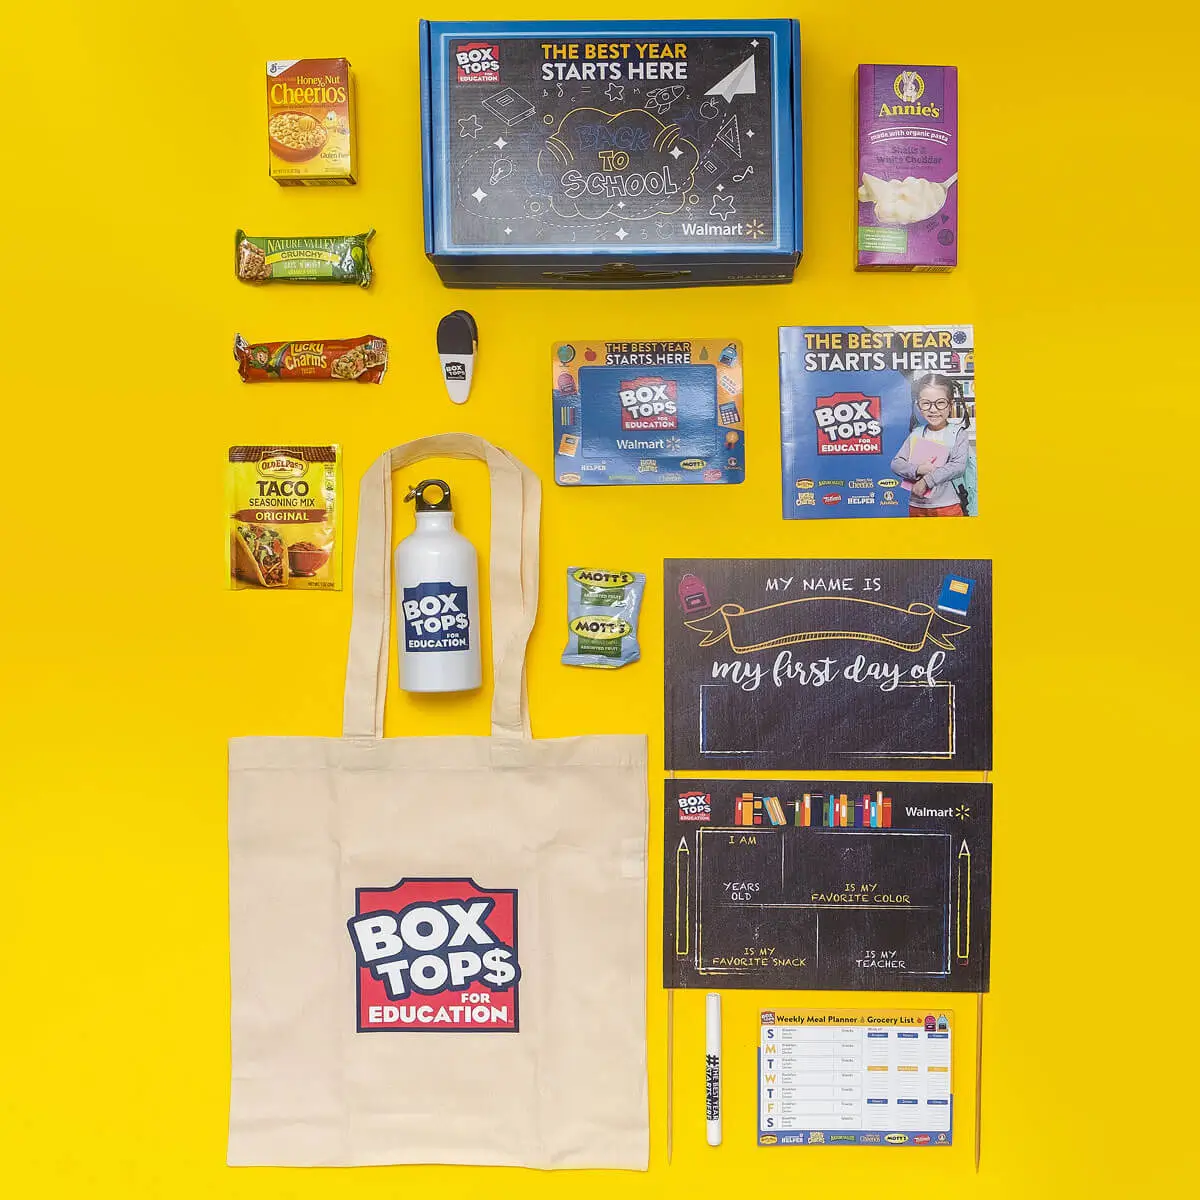 Back-to-School Box Tops sample box components